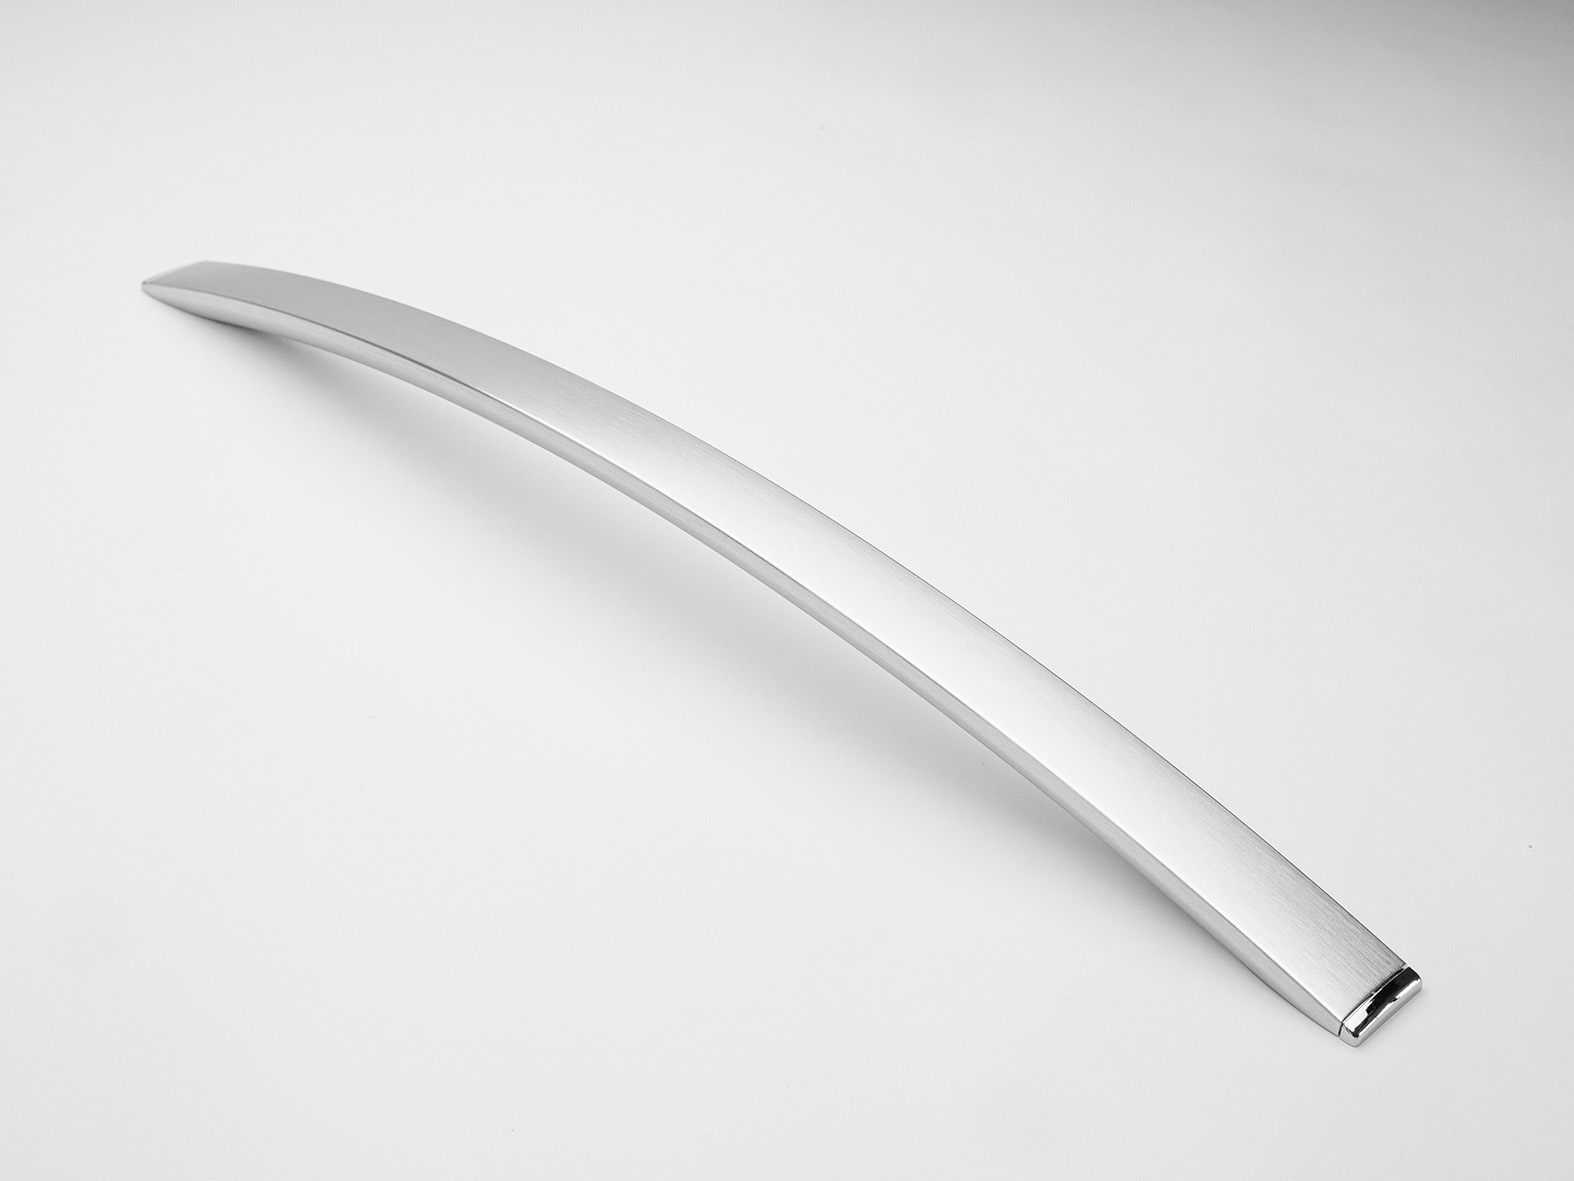 Rolled oven handle - Brushed Anodized Stainless Steel with chromed plastic terminal